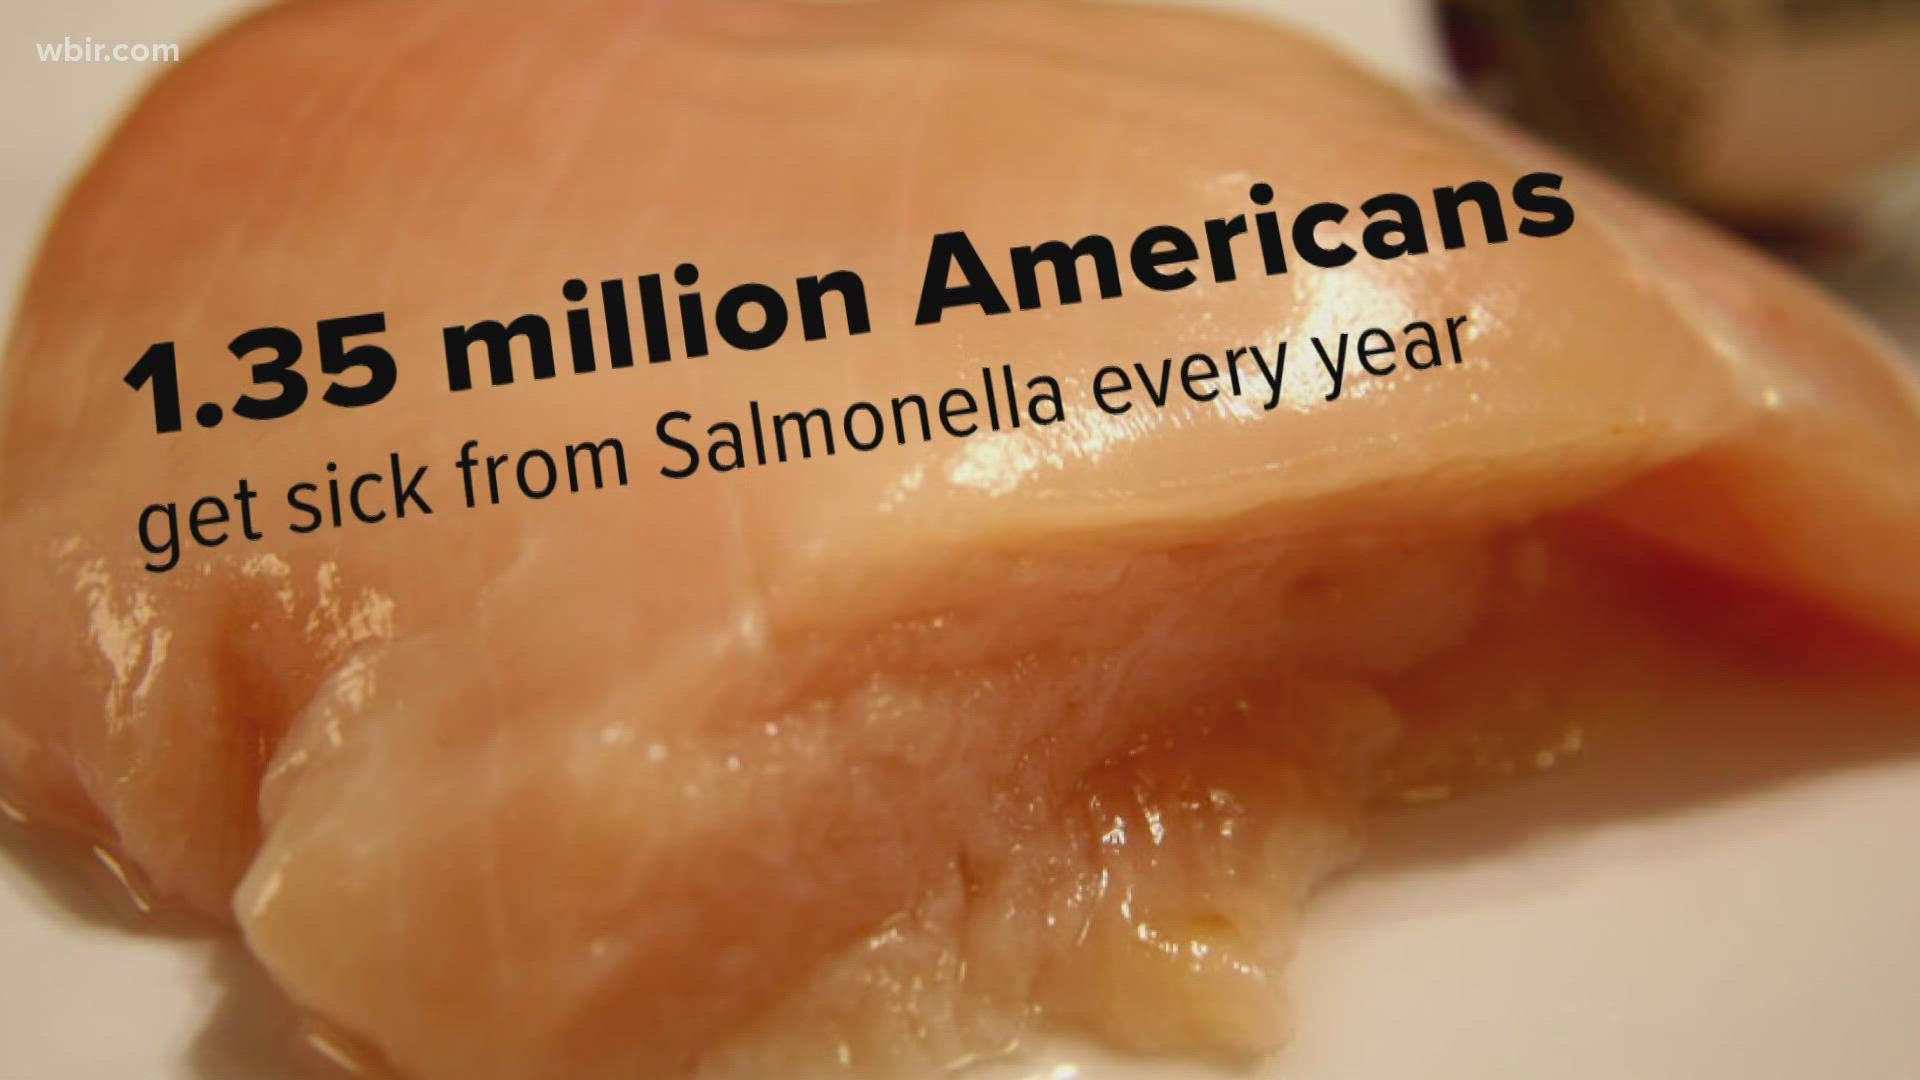 The CDC estimates that 1.35 million Americans get sick because of salmonella every year. About a fifth of those illnesses come from chicken and turkey.